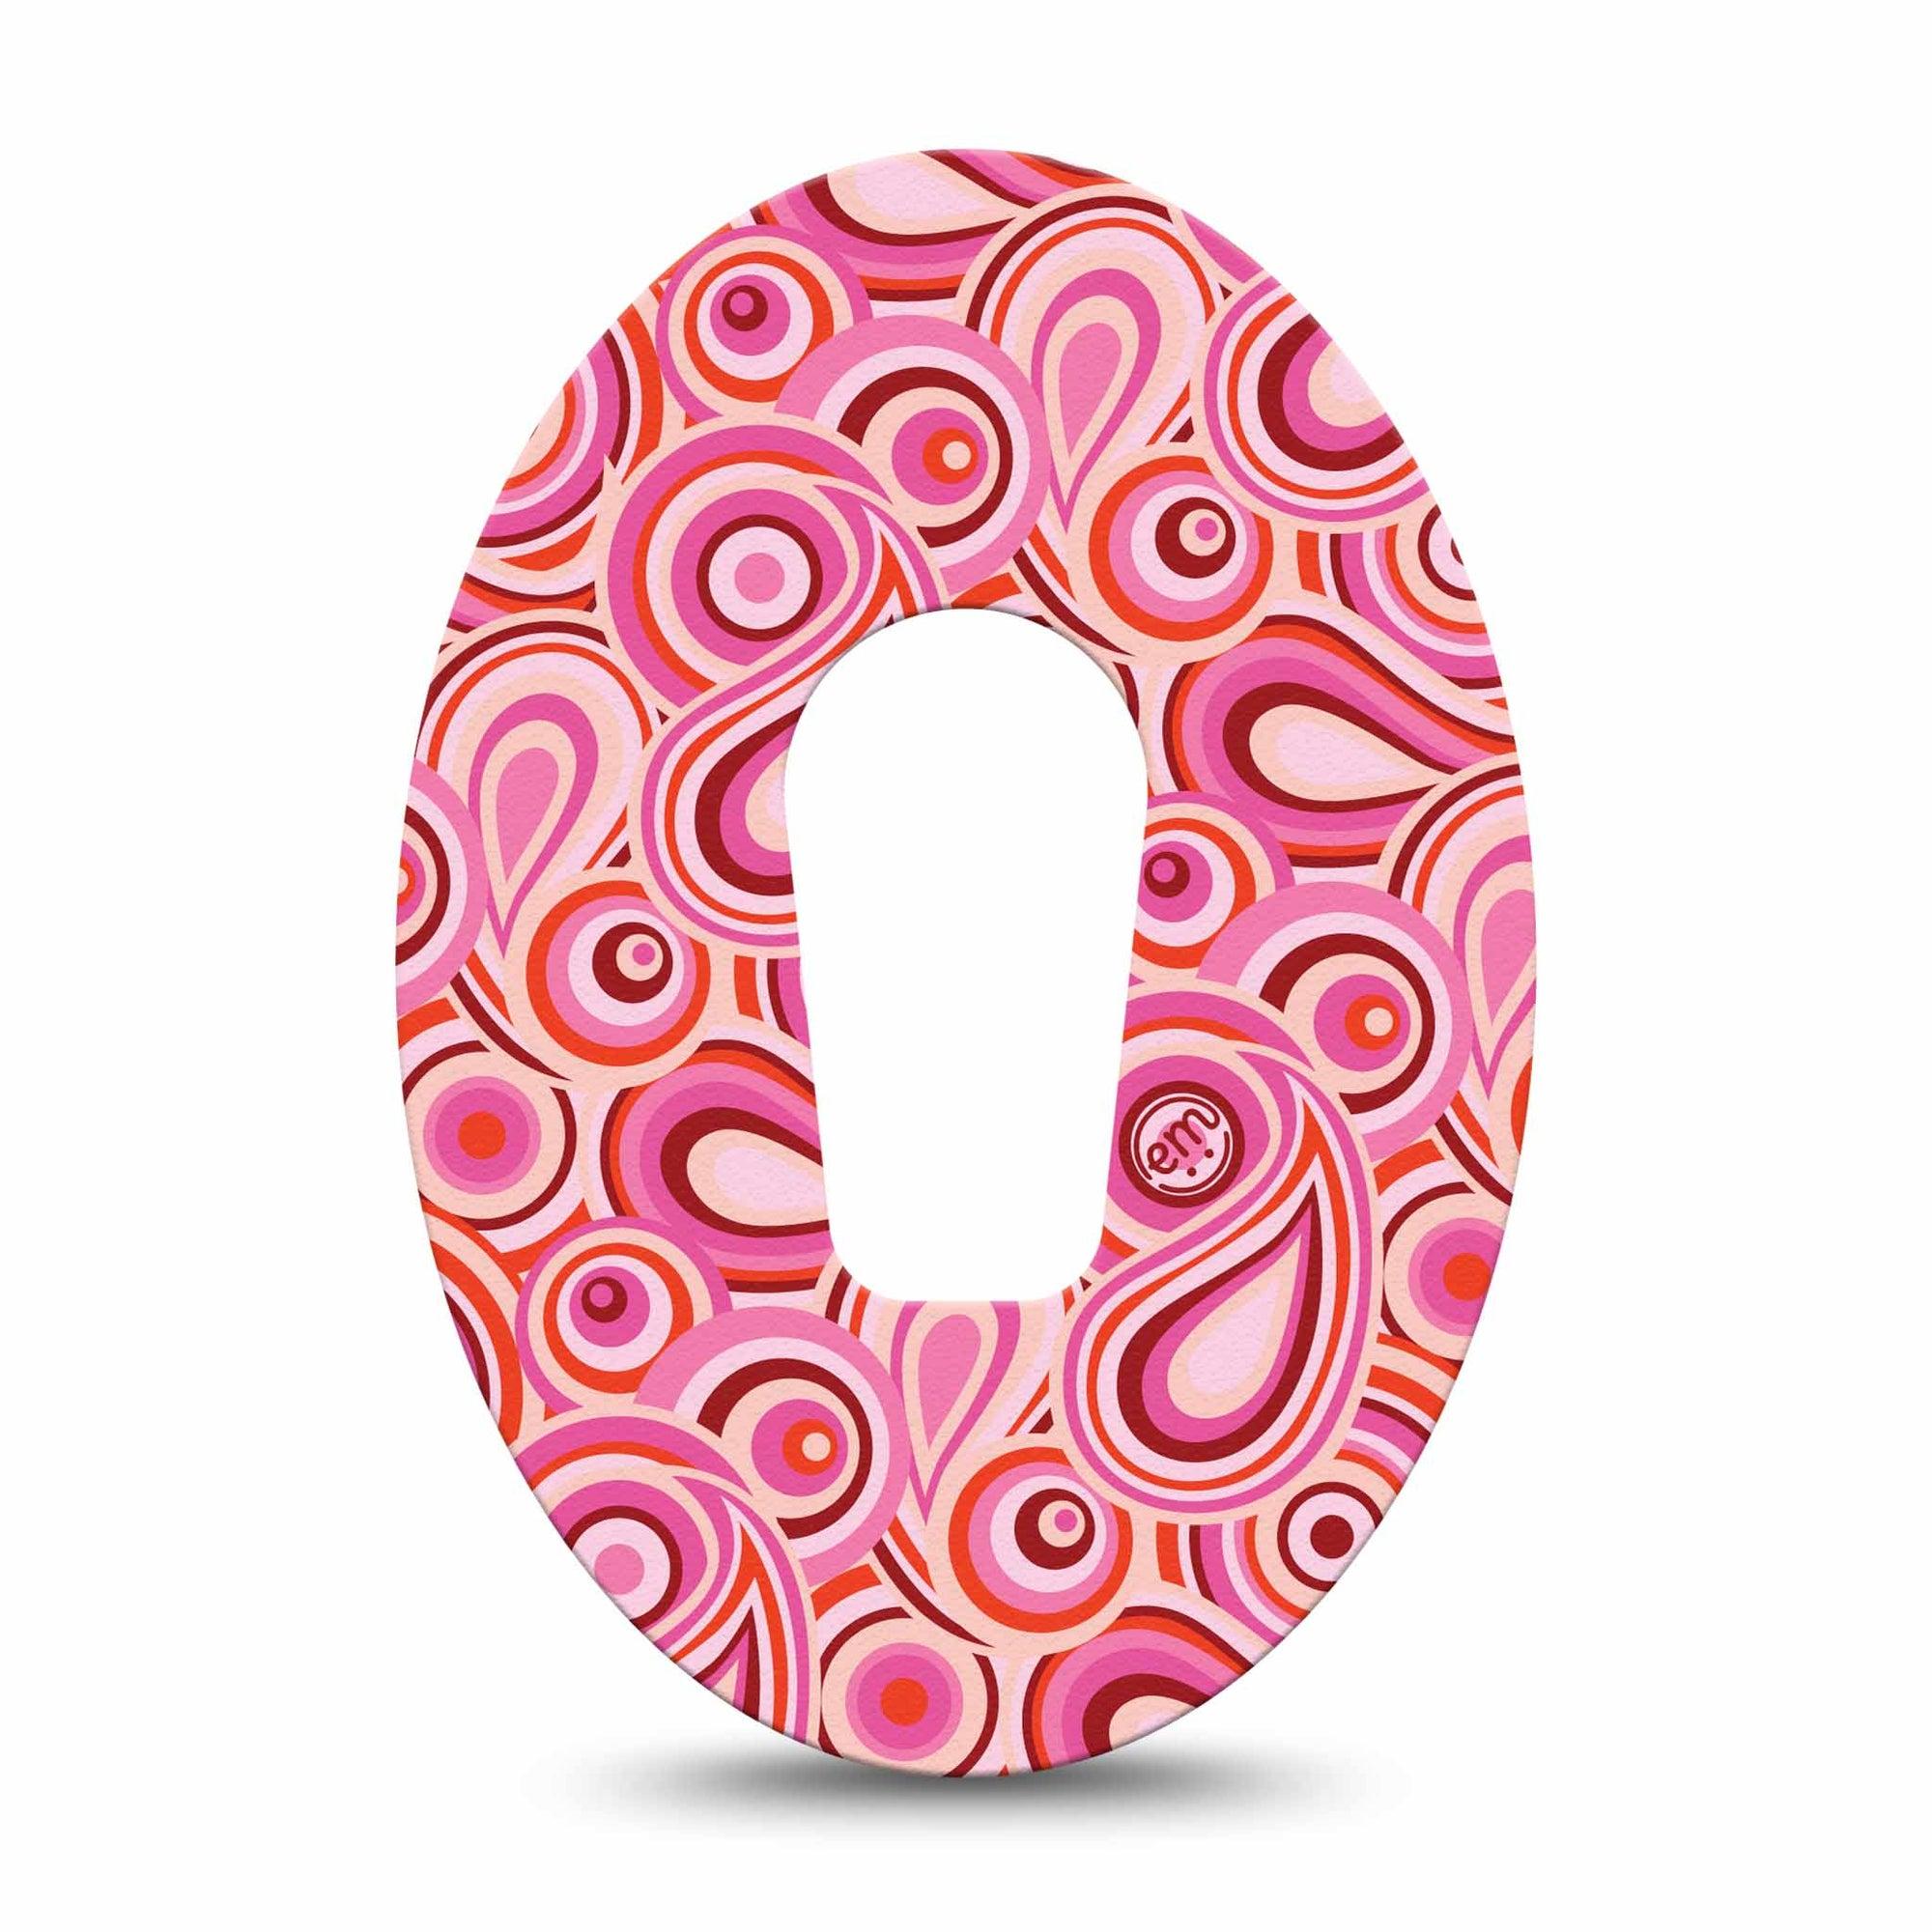 ExpressionMed BB Pink Party Dexcom G6 Tape, Single, Girly Design Inspired, CGM Overlay Patch Design